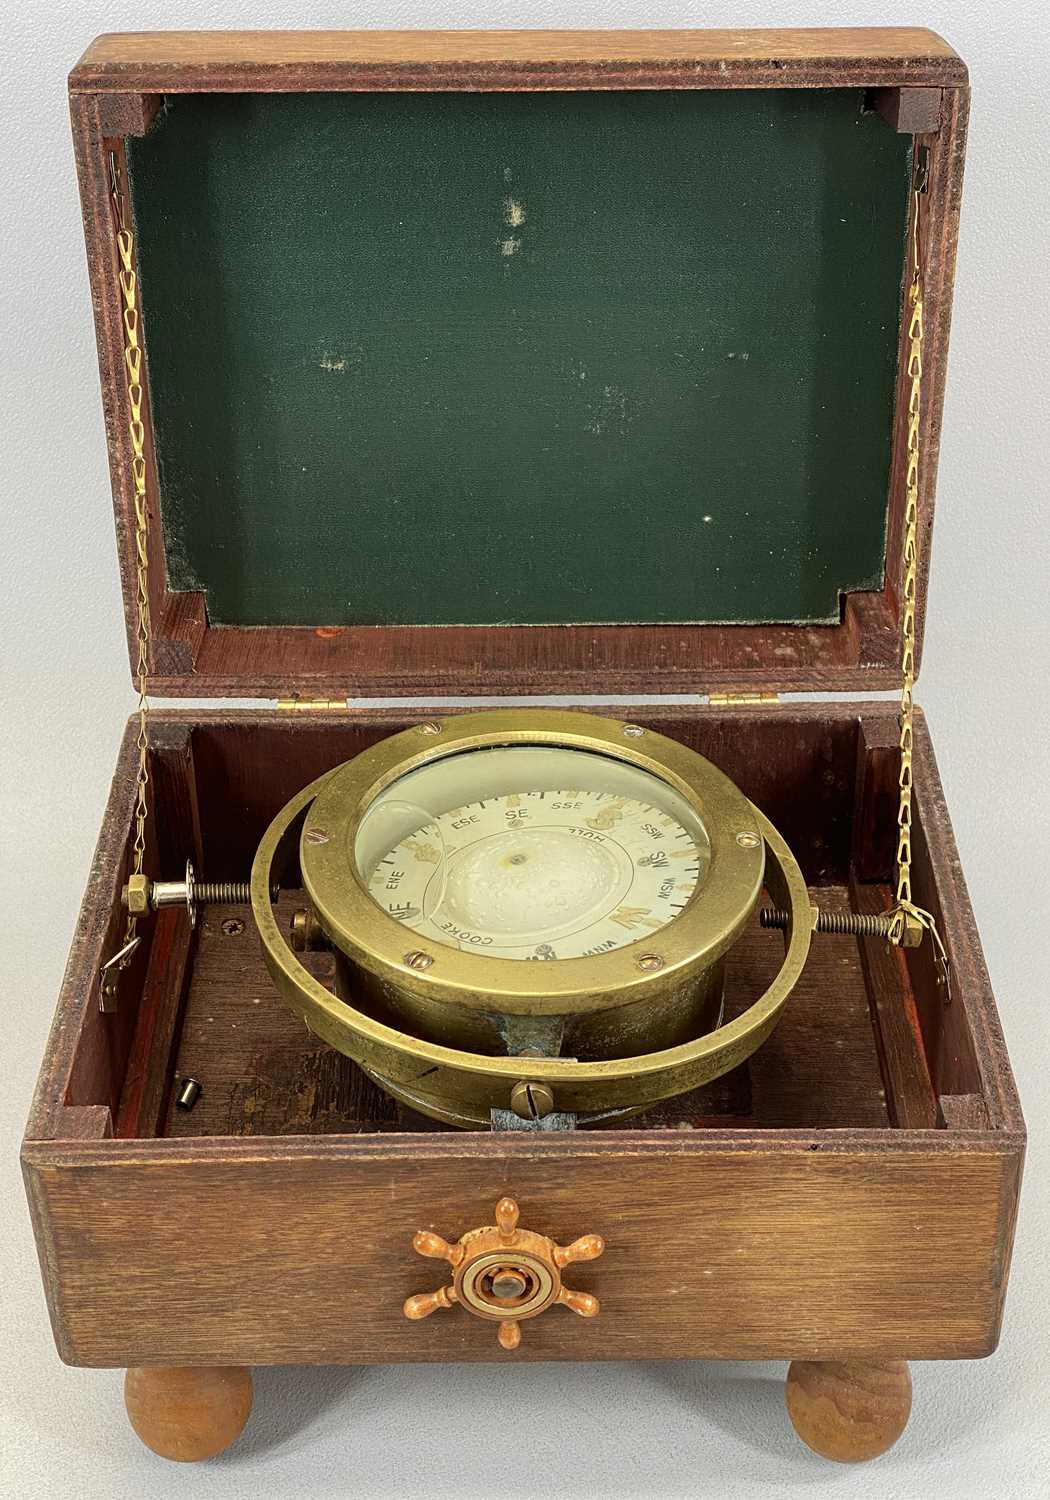 VINTAGE COOK OF HULL BRASS CASED SHIP'S COMPASS, mounted on gimbal in stained plywood box with - Image 2 of 3